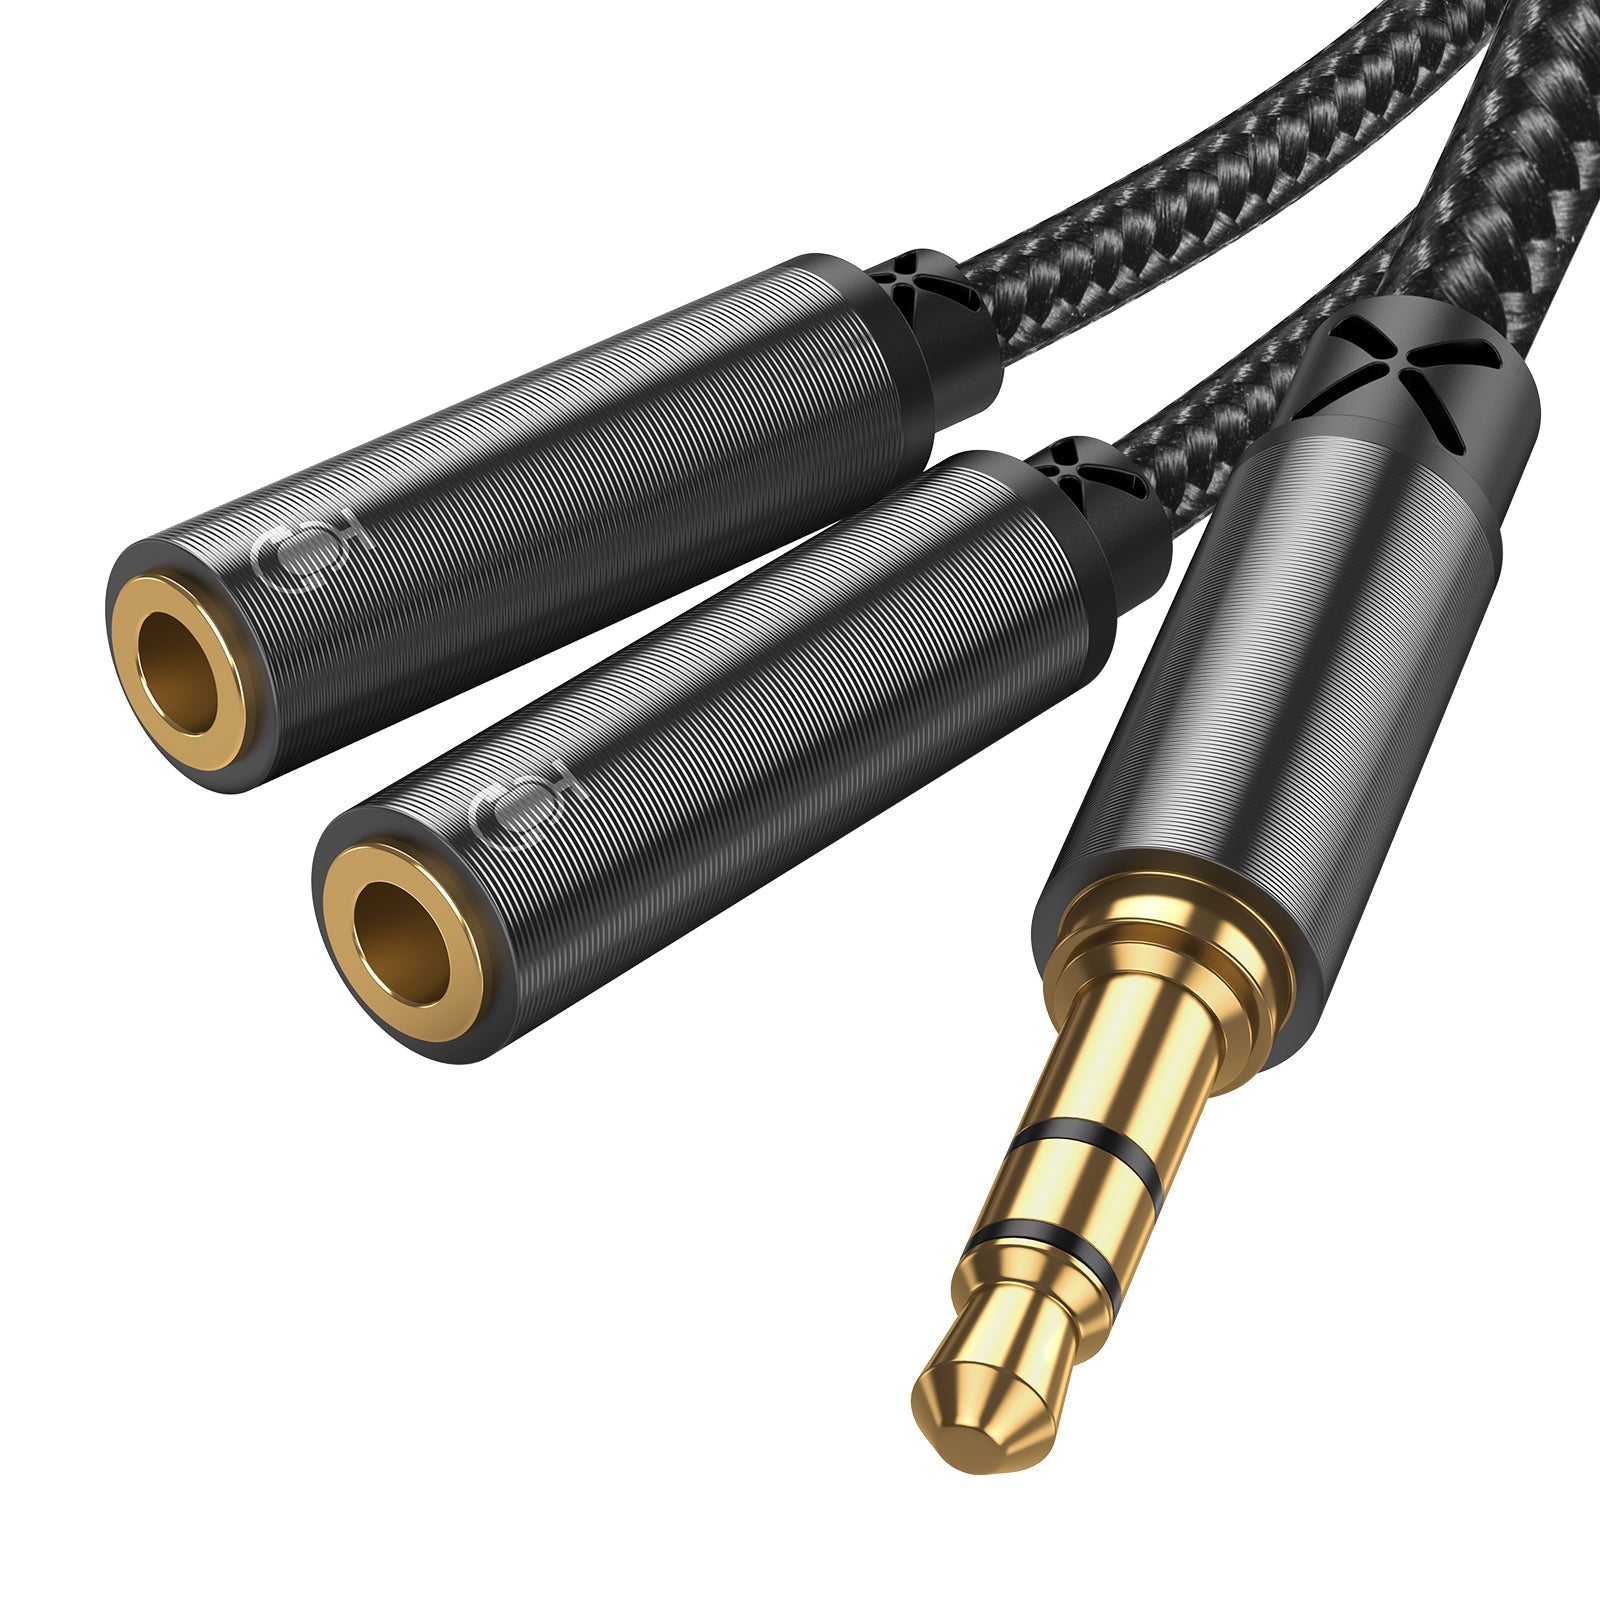 Joyroom Male To 2-Female Y-splitter Audio Cable SY-A04 Three store